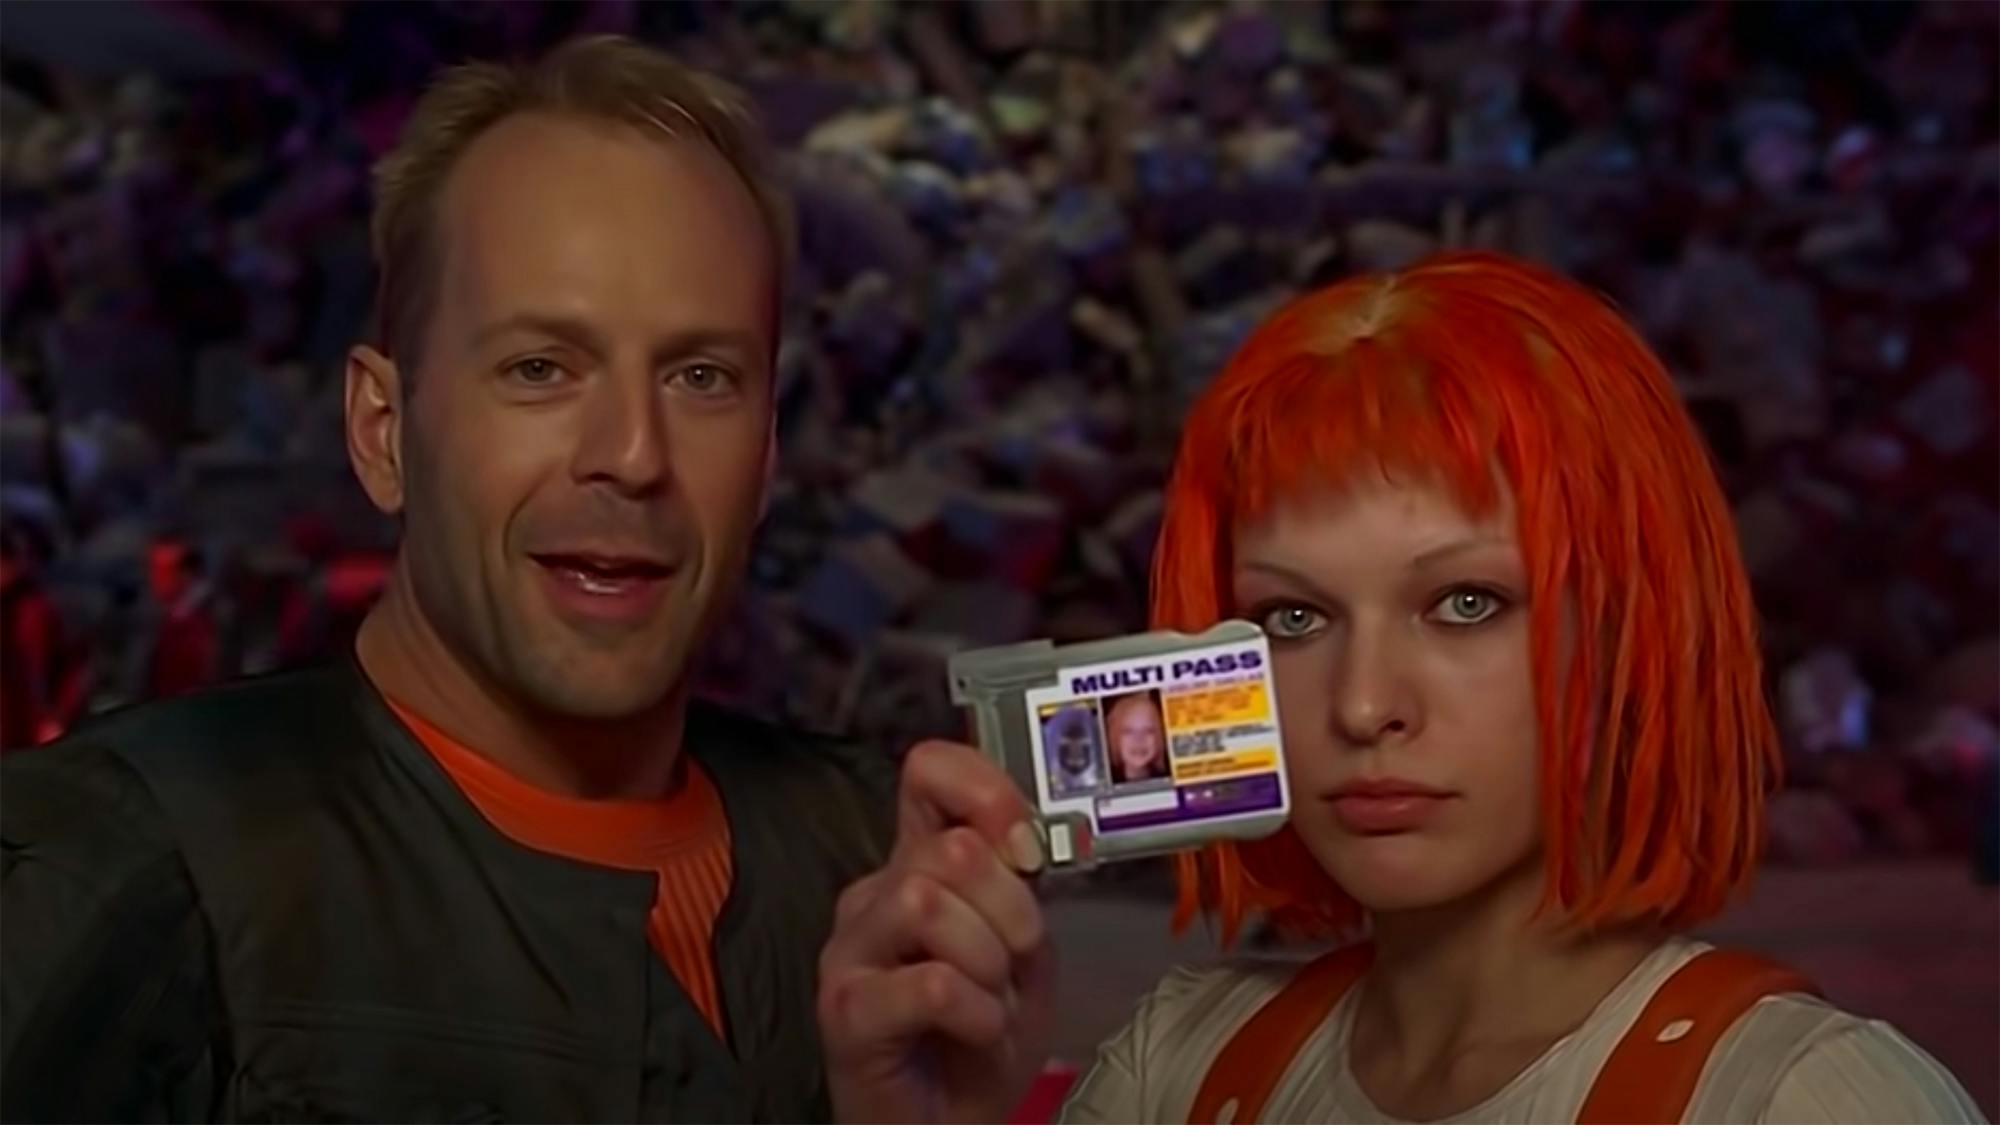 25 years on, how well did The Fifth Element predict the future?